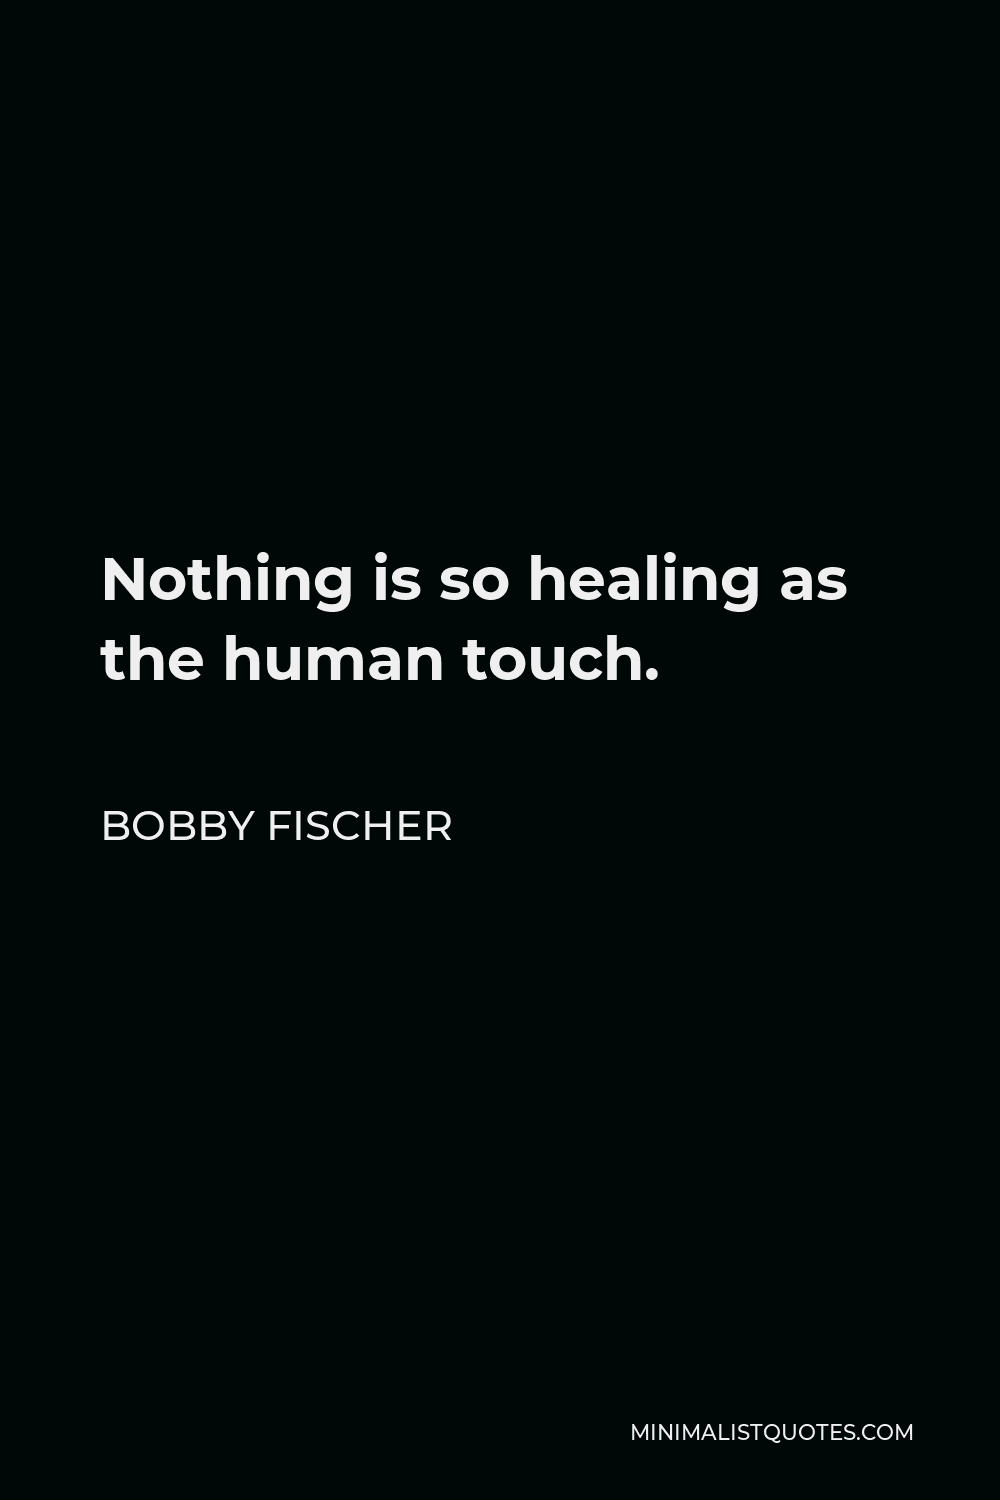 Bobby Fischer Quote: Nothing is so healing as the human touch.